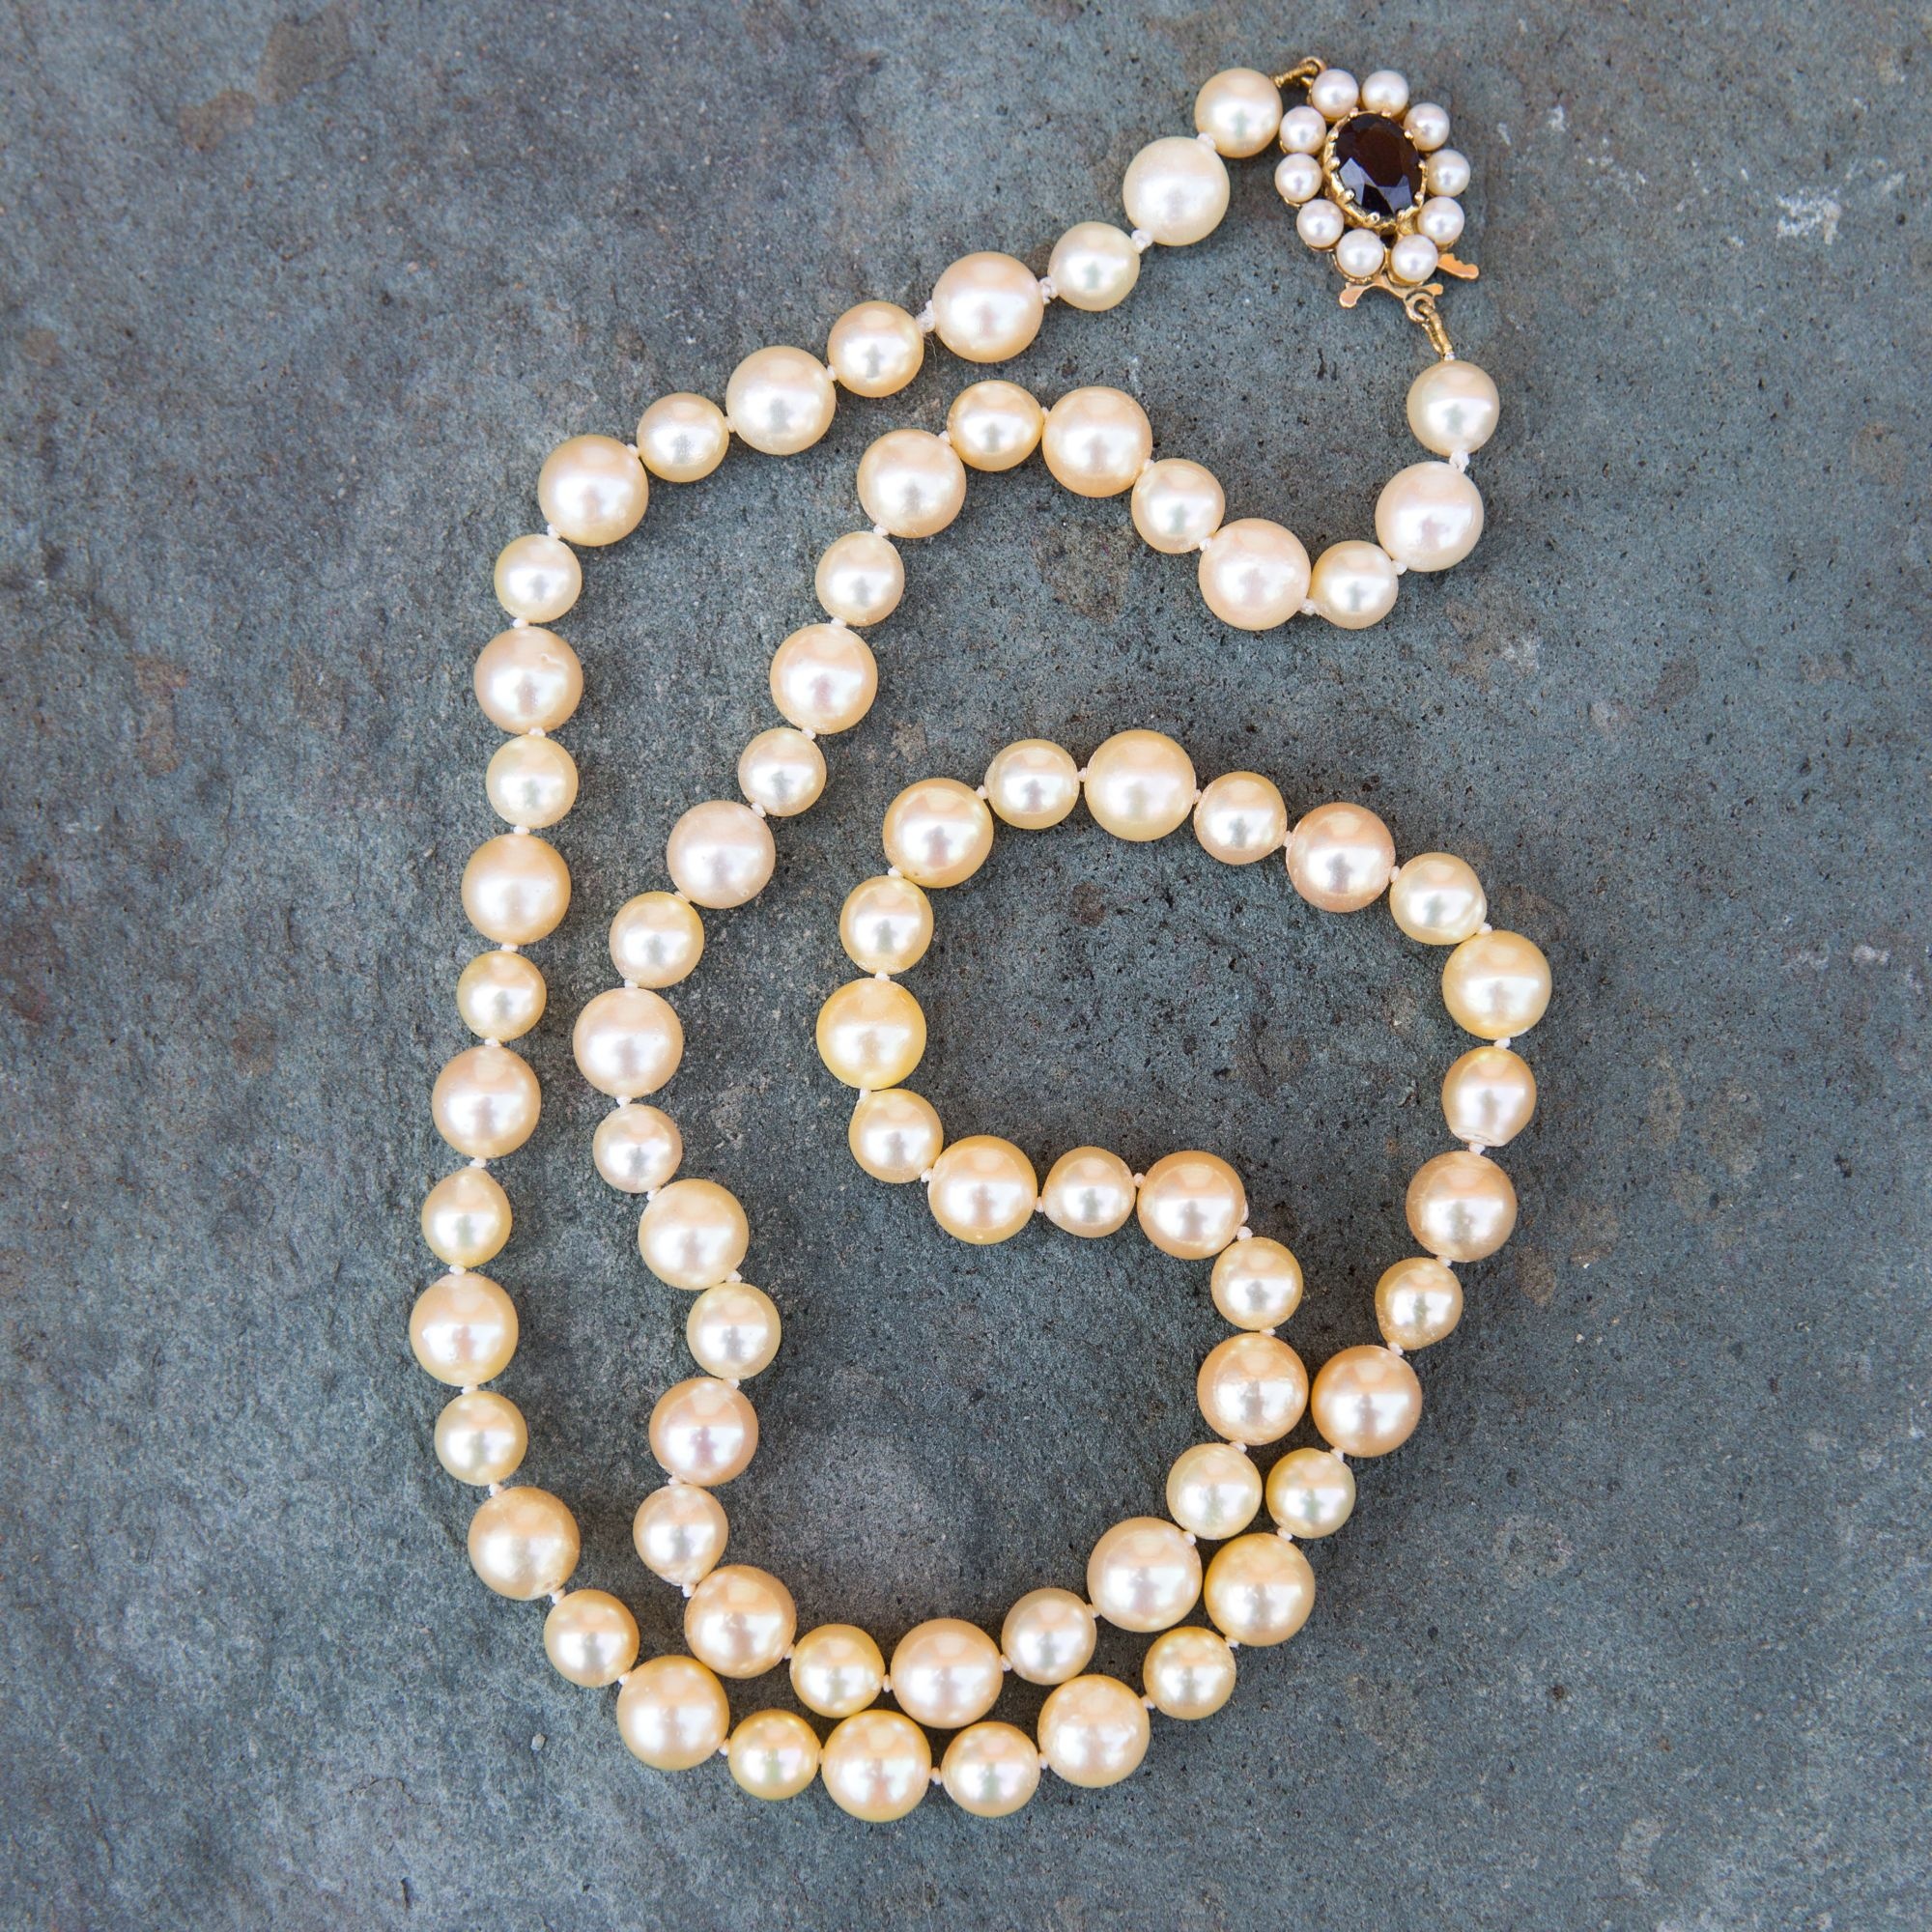 Pearl, Creamy gold cultured pearl necklace, 2000x2000 HD Handy